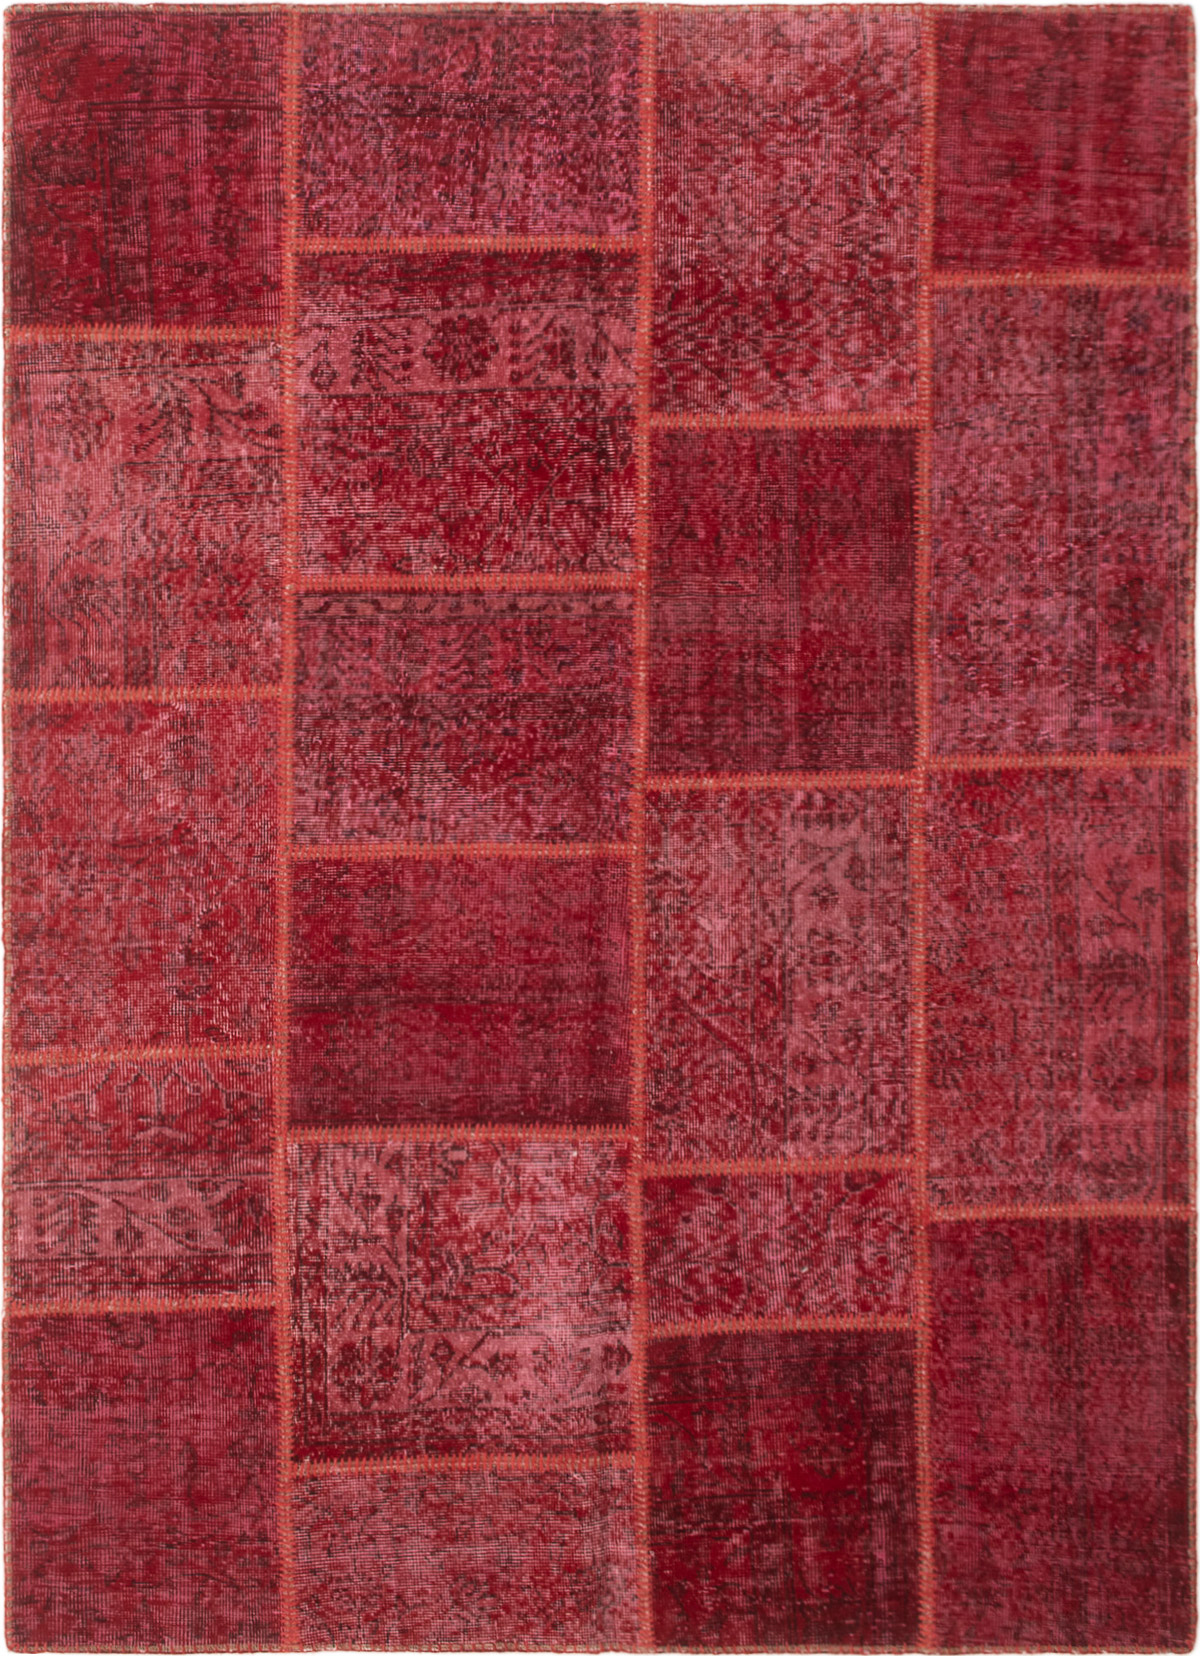 Hand-knotted Color Transition Patch Dark Red Wool Rug 5'7" x 7'8" Size: 5'7" x 7'8"  